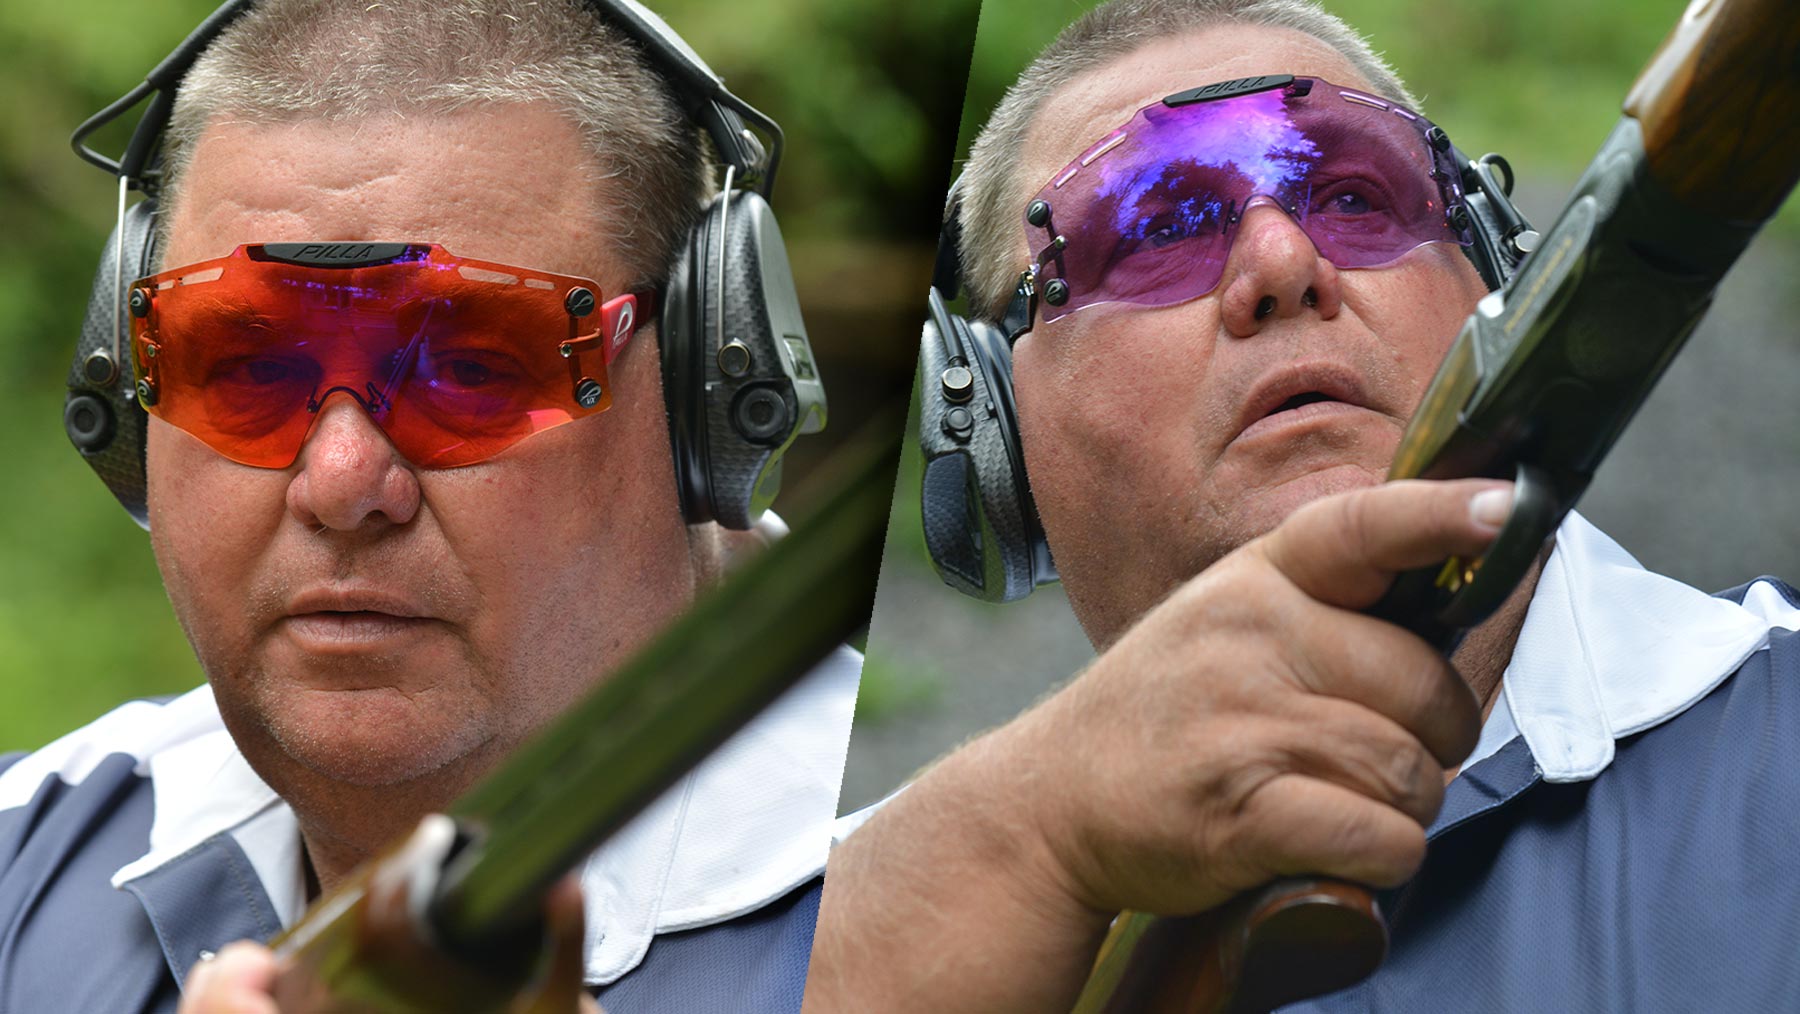 george-digweed-learned-to-shoot